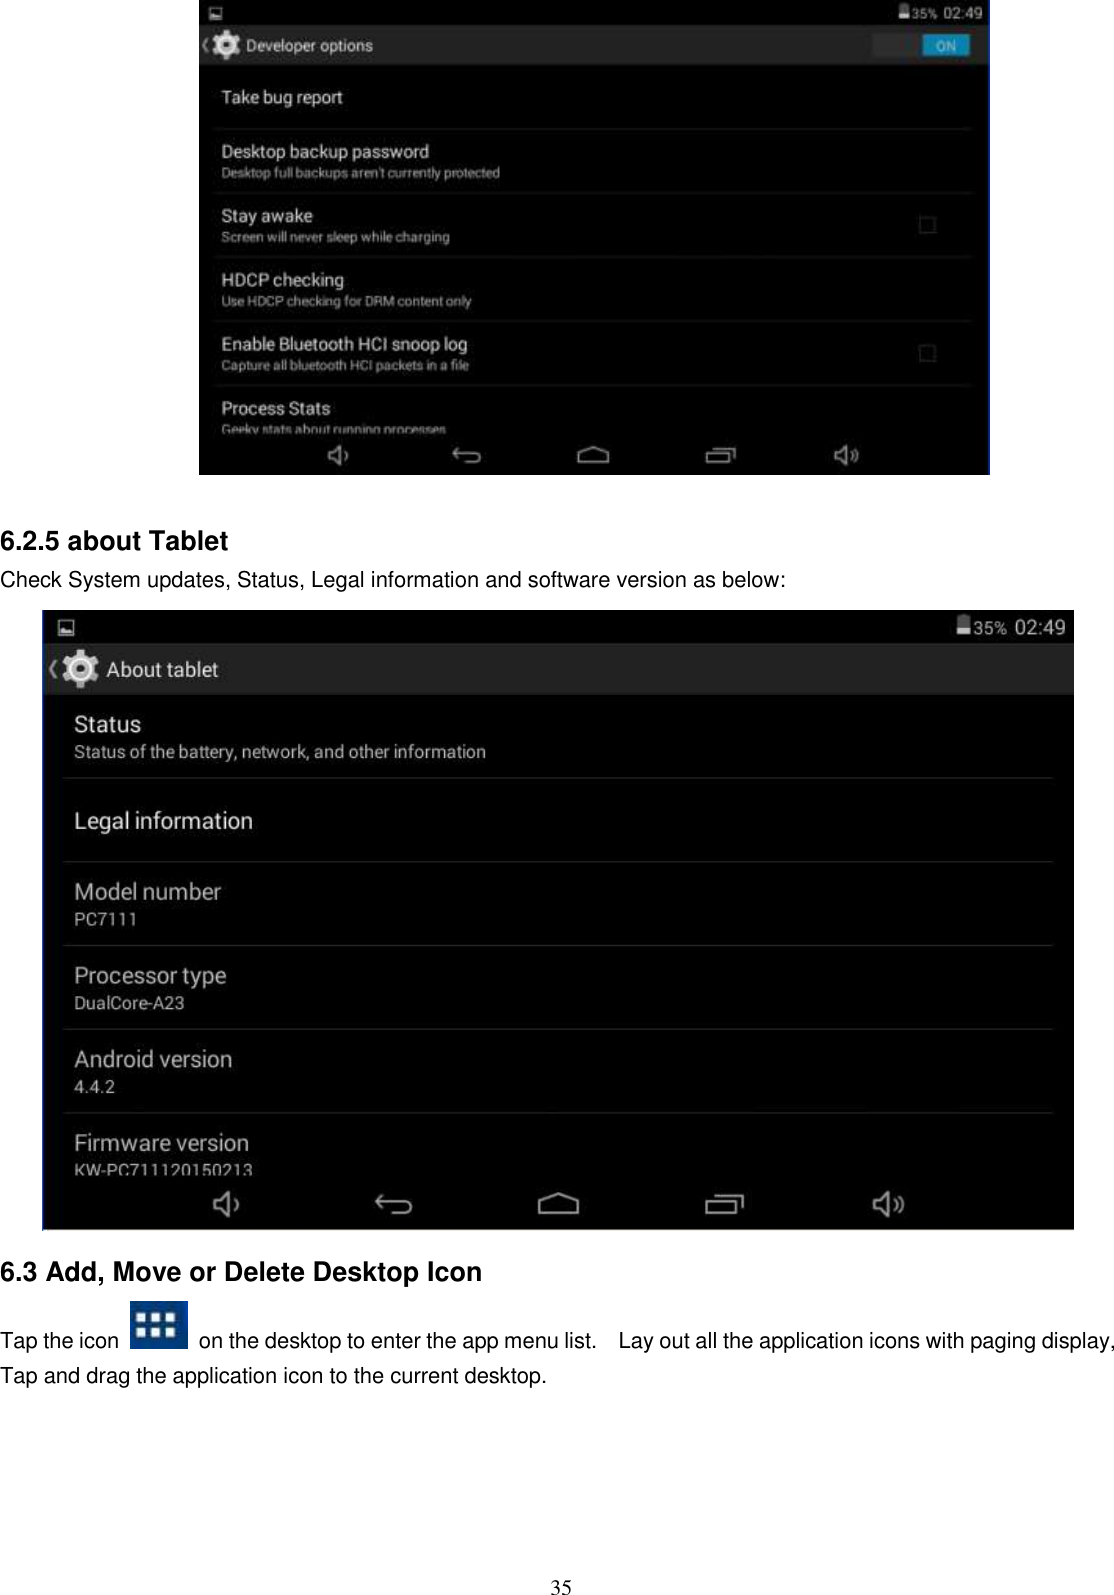  35          6.2.5 about Tablet Check System updates, Status, Legal information and software version as below:  6.3 Add, Move or Delete Desktop Icon Tap the icon    on the desktop to enter the app menu list.    Lay out all the application icons with paging display, Tap and drag the application icon to the current desktop.    